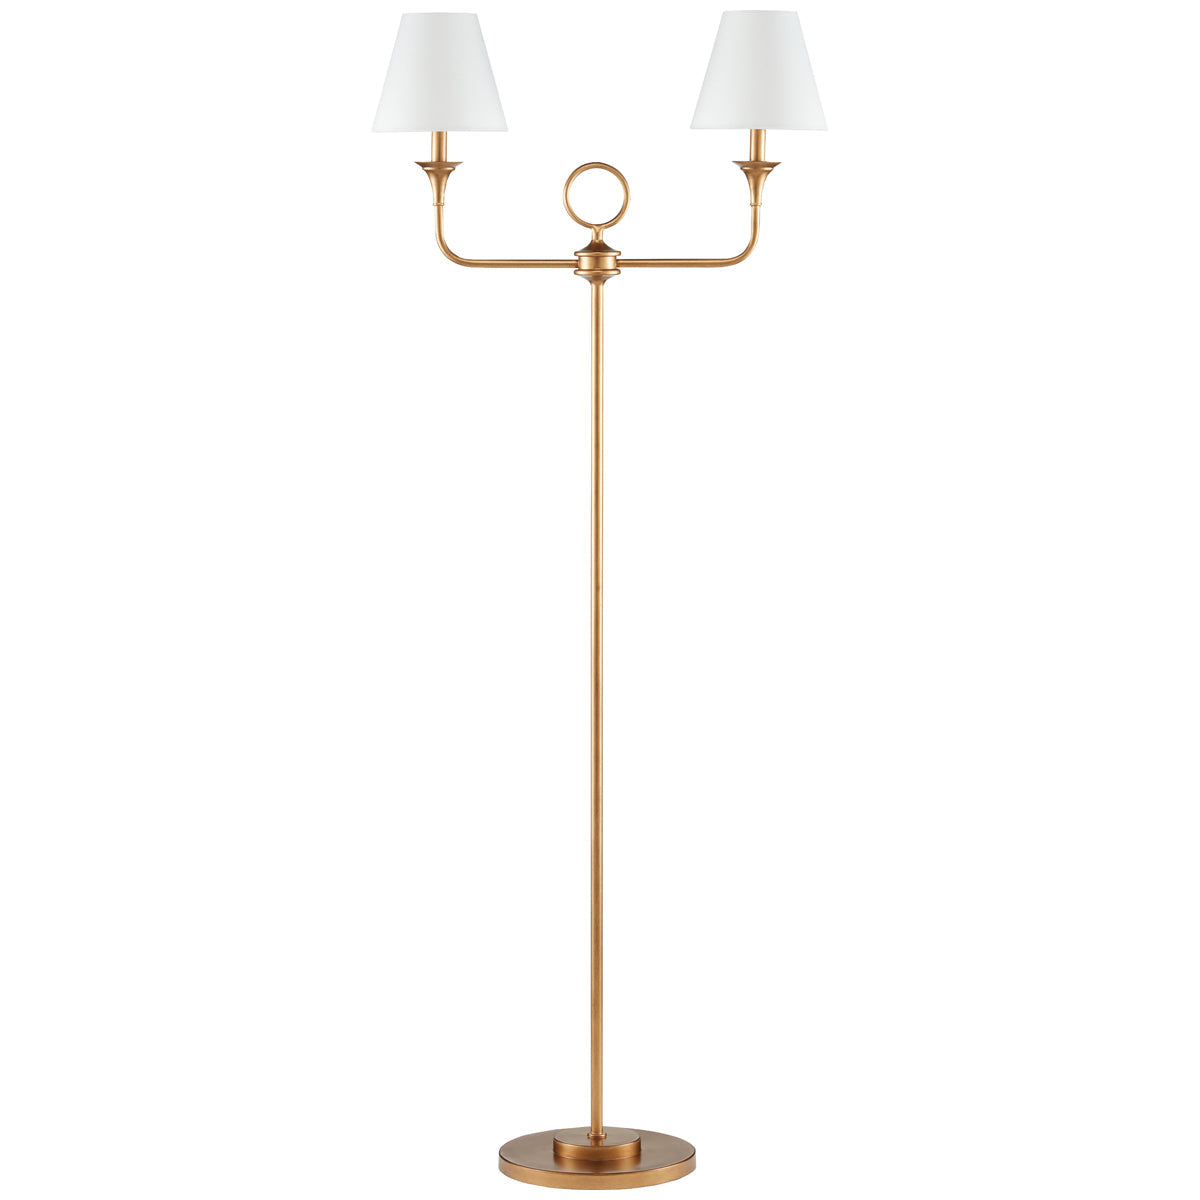 Currey and Company Nottaway Floor Lamp